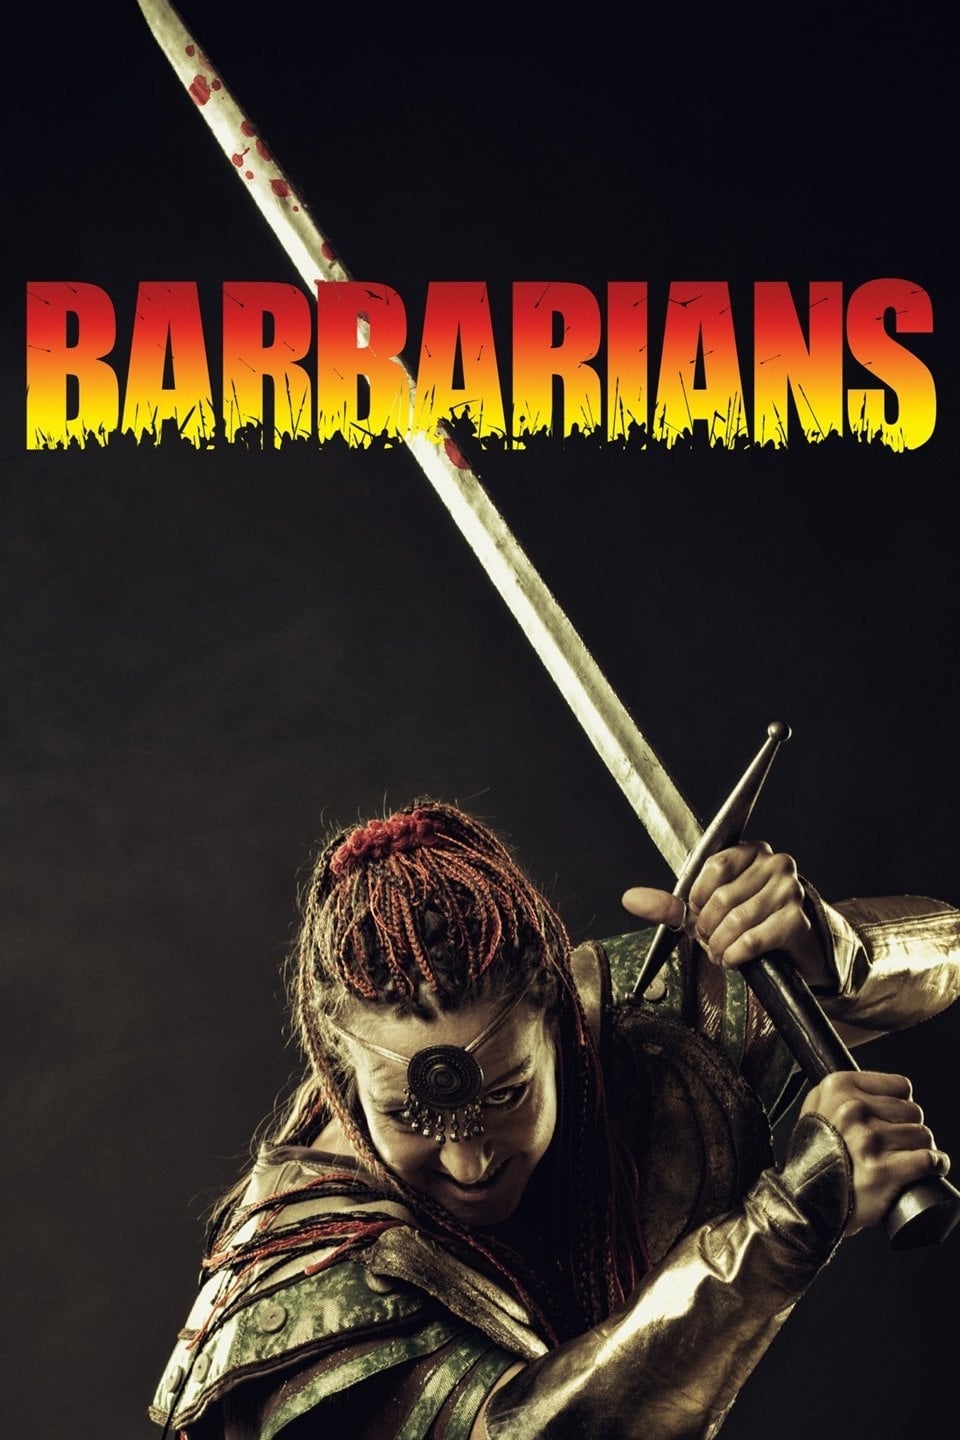 Barbarians TV Shows About Viking